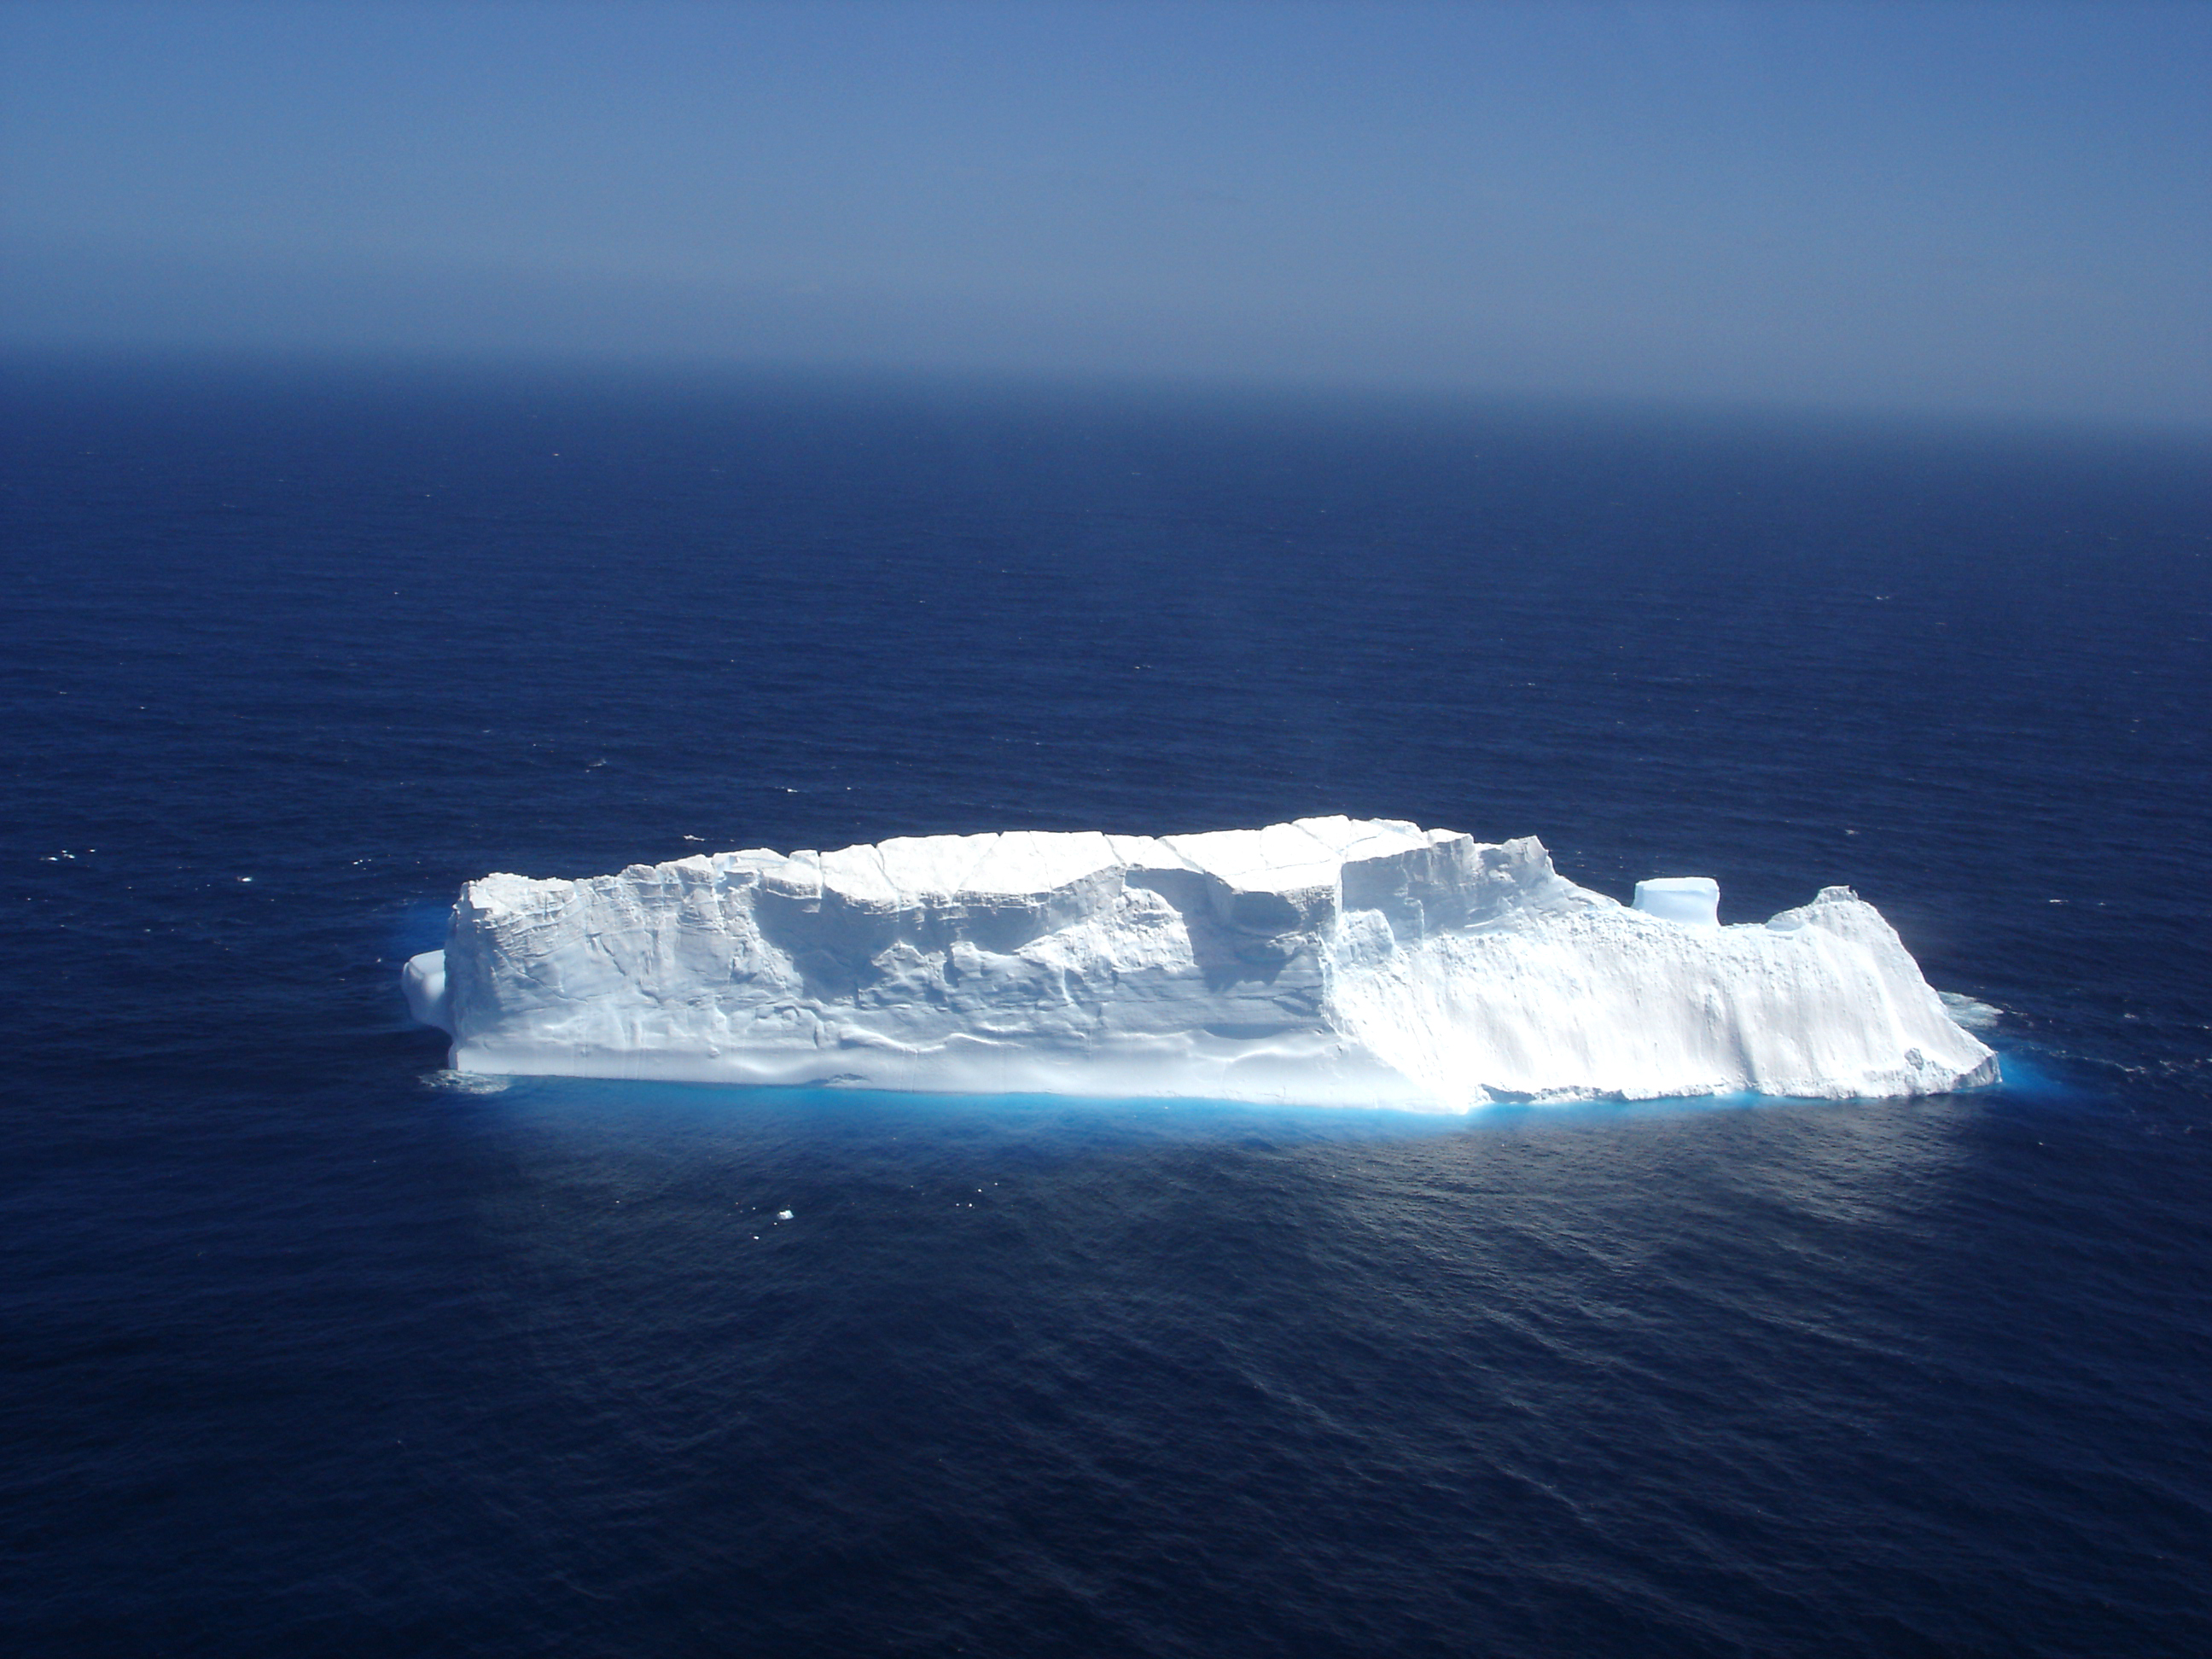 ICEBERGS AHEAD: 3 WARNING SIGNS OF DANGEROUS WATERS | Monday Morning ...